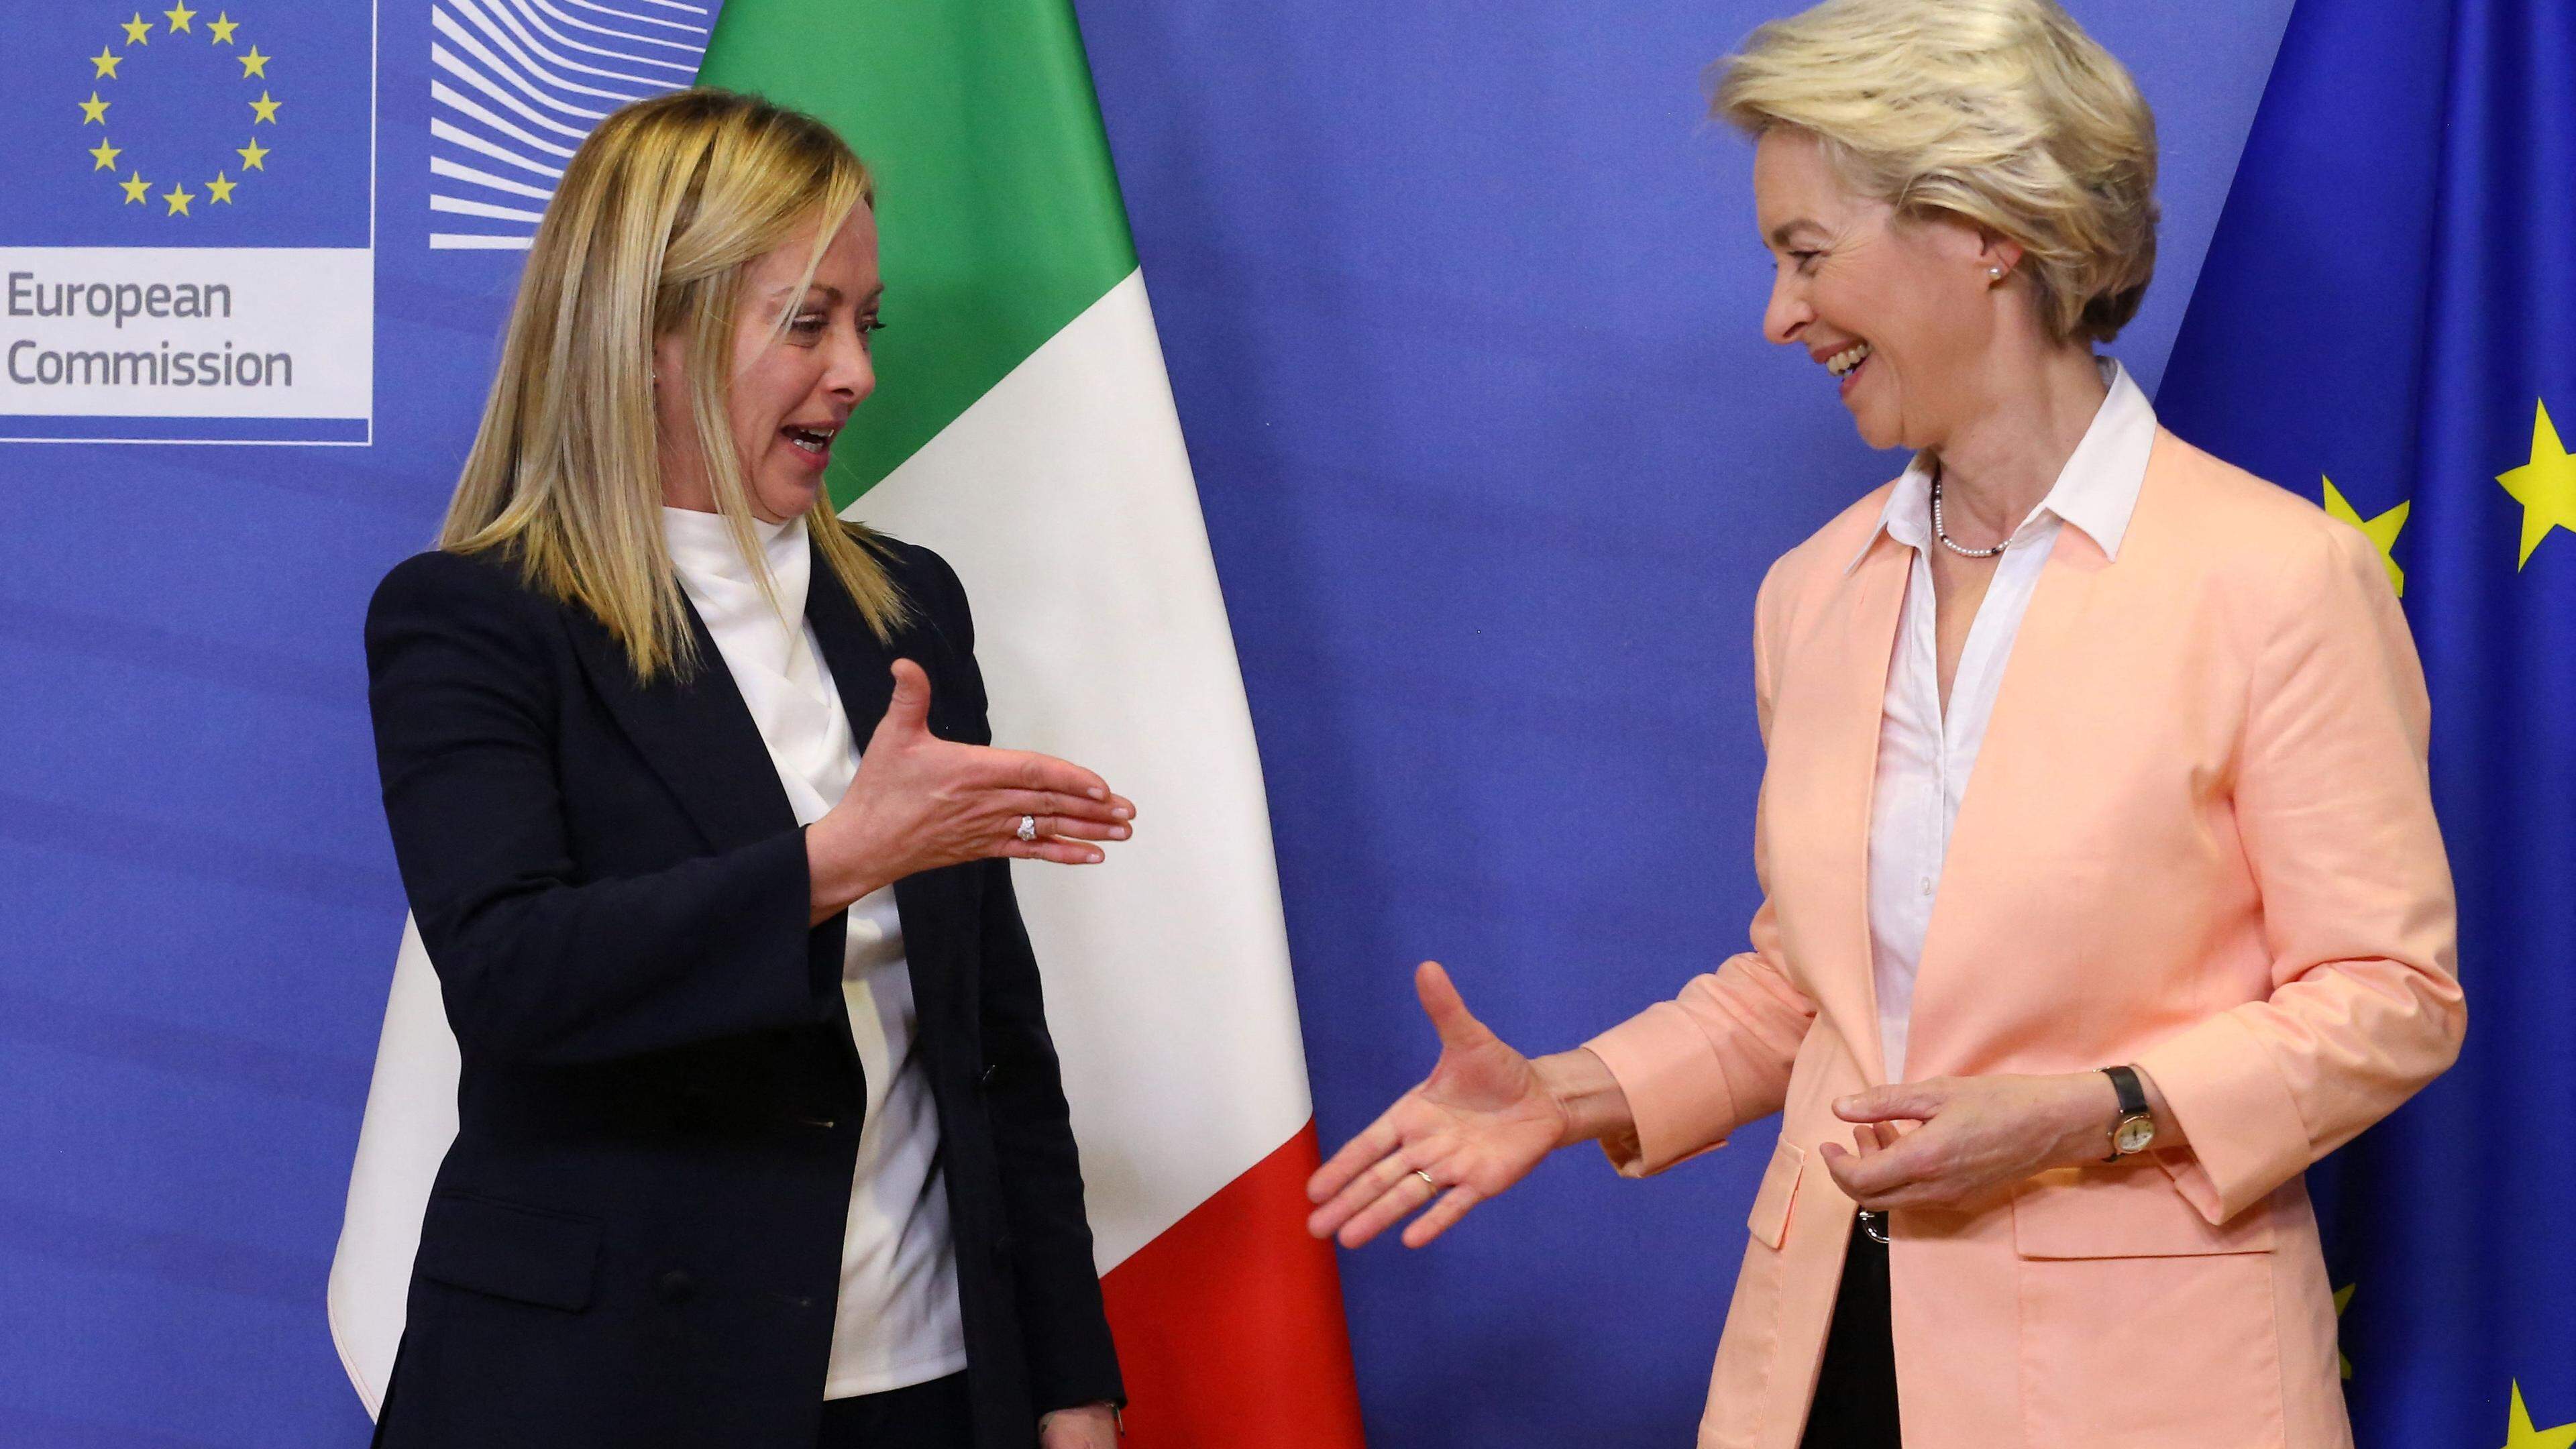 Newly appointed Italian Prime Minister Giorgia Meloni (L) shakes hands with President of the European Commission Ursula von der Leyen during a meeting at the European Commission headquarter in Brussels, on November 3, 2022. - Italy's far-right Prime Minister Giorgia Meloni started a series of meetings with EU chiefs in Brussels on November 3, with her commitment to European unity in the spotlight. (Photo by Valeria Mongelli / AFP)